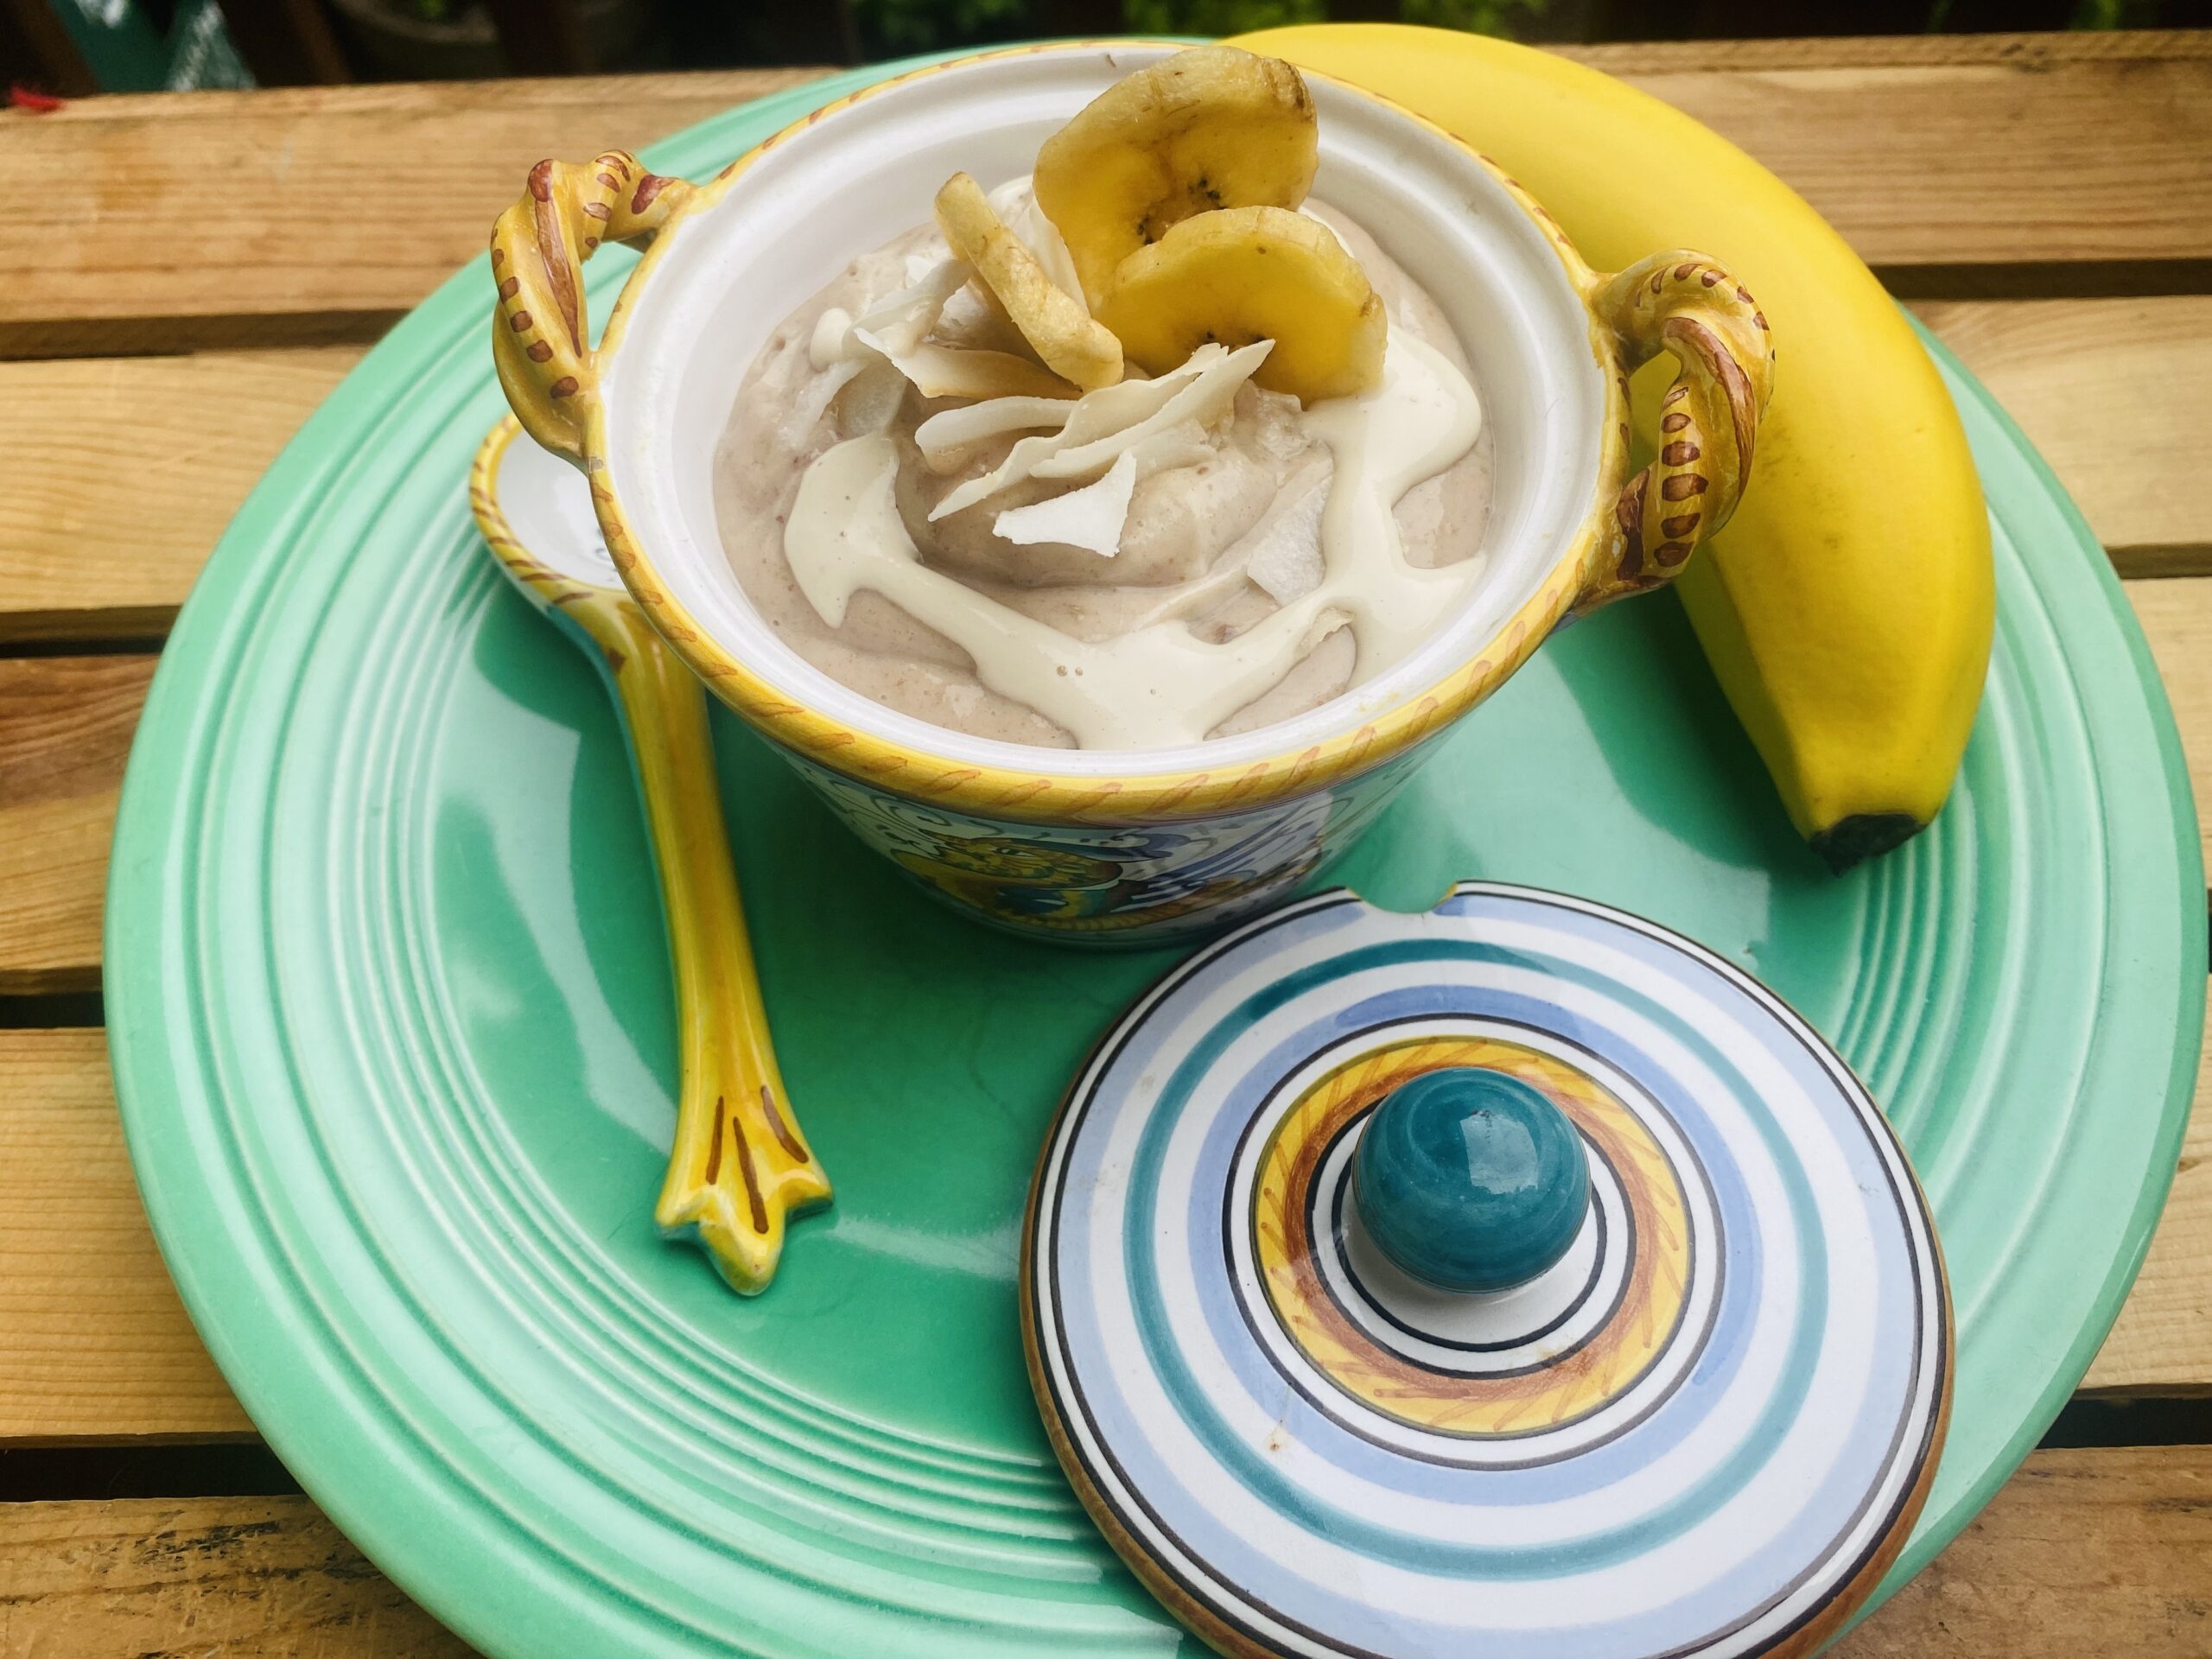 Featured image for “Banana Pudding”